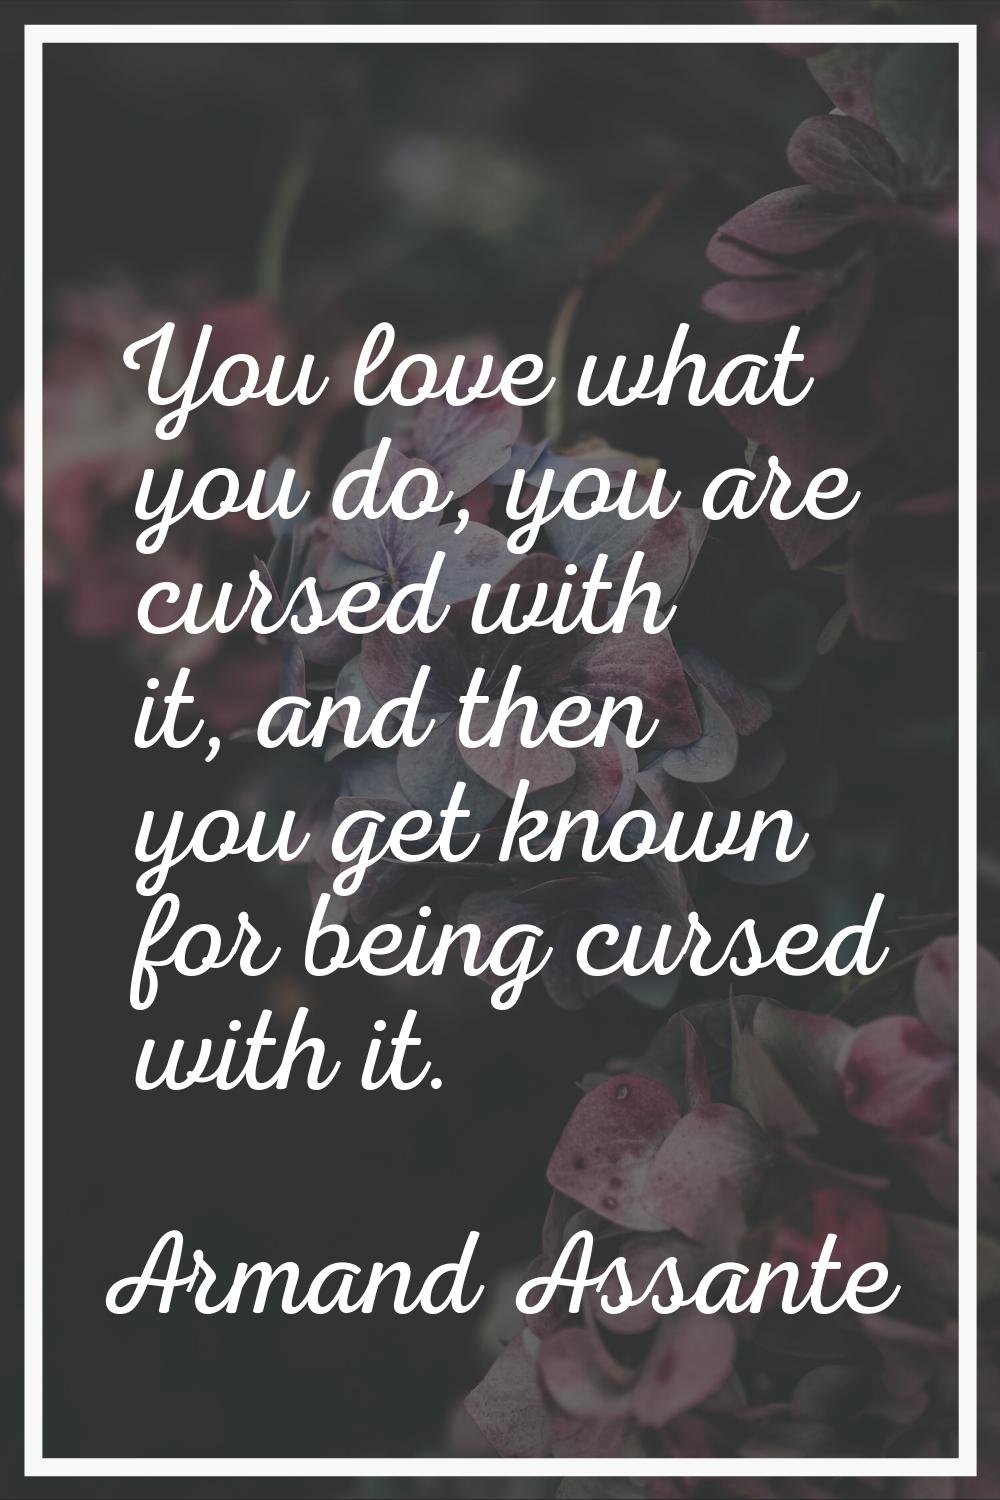 You love what you do, you are cursed with it, and then you get known for being cursed with it.